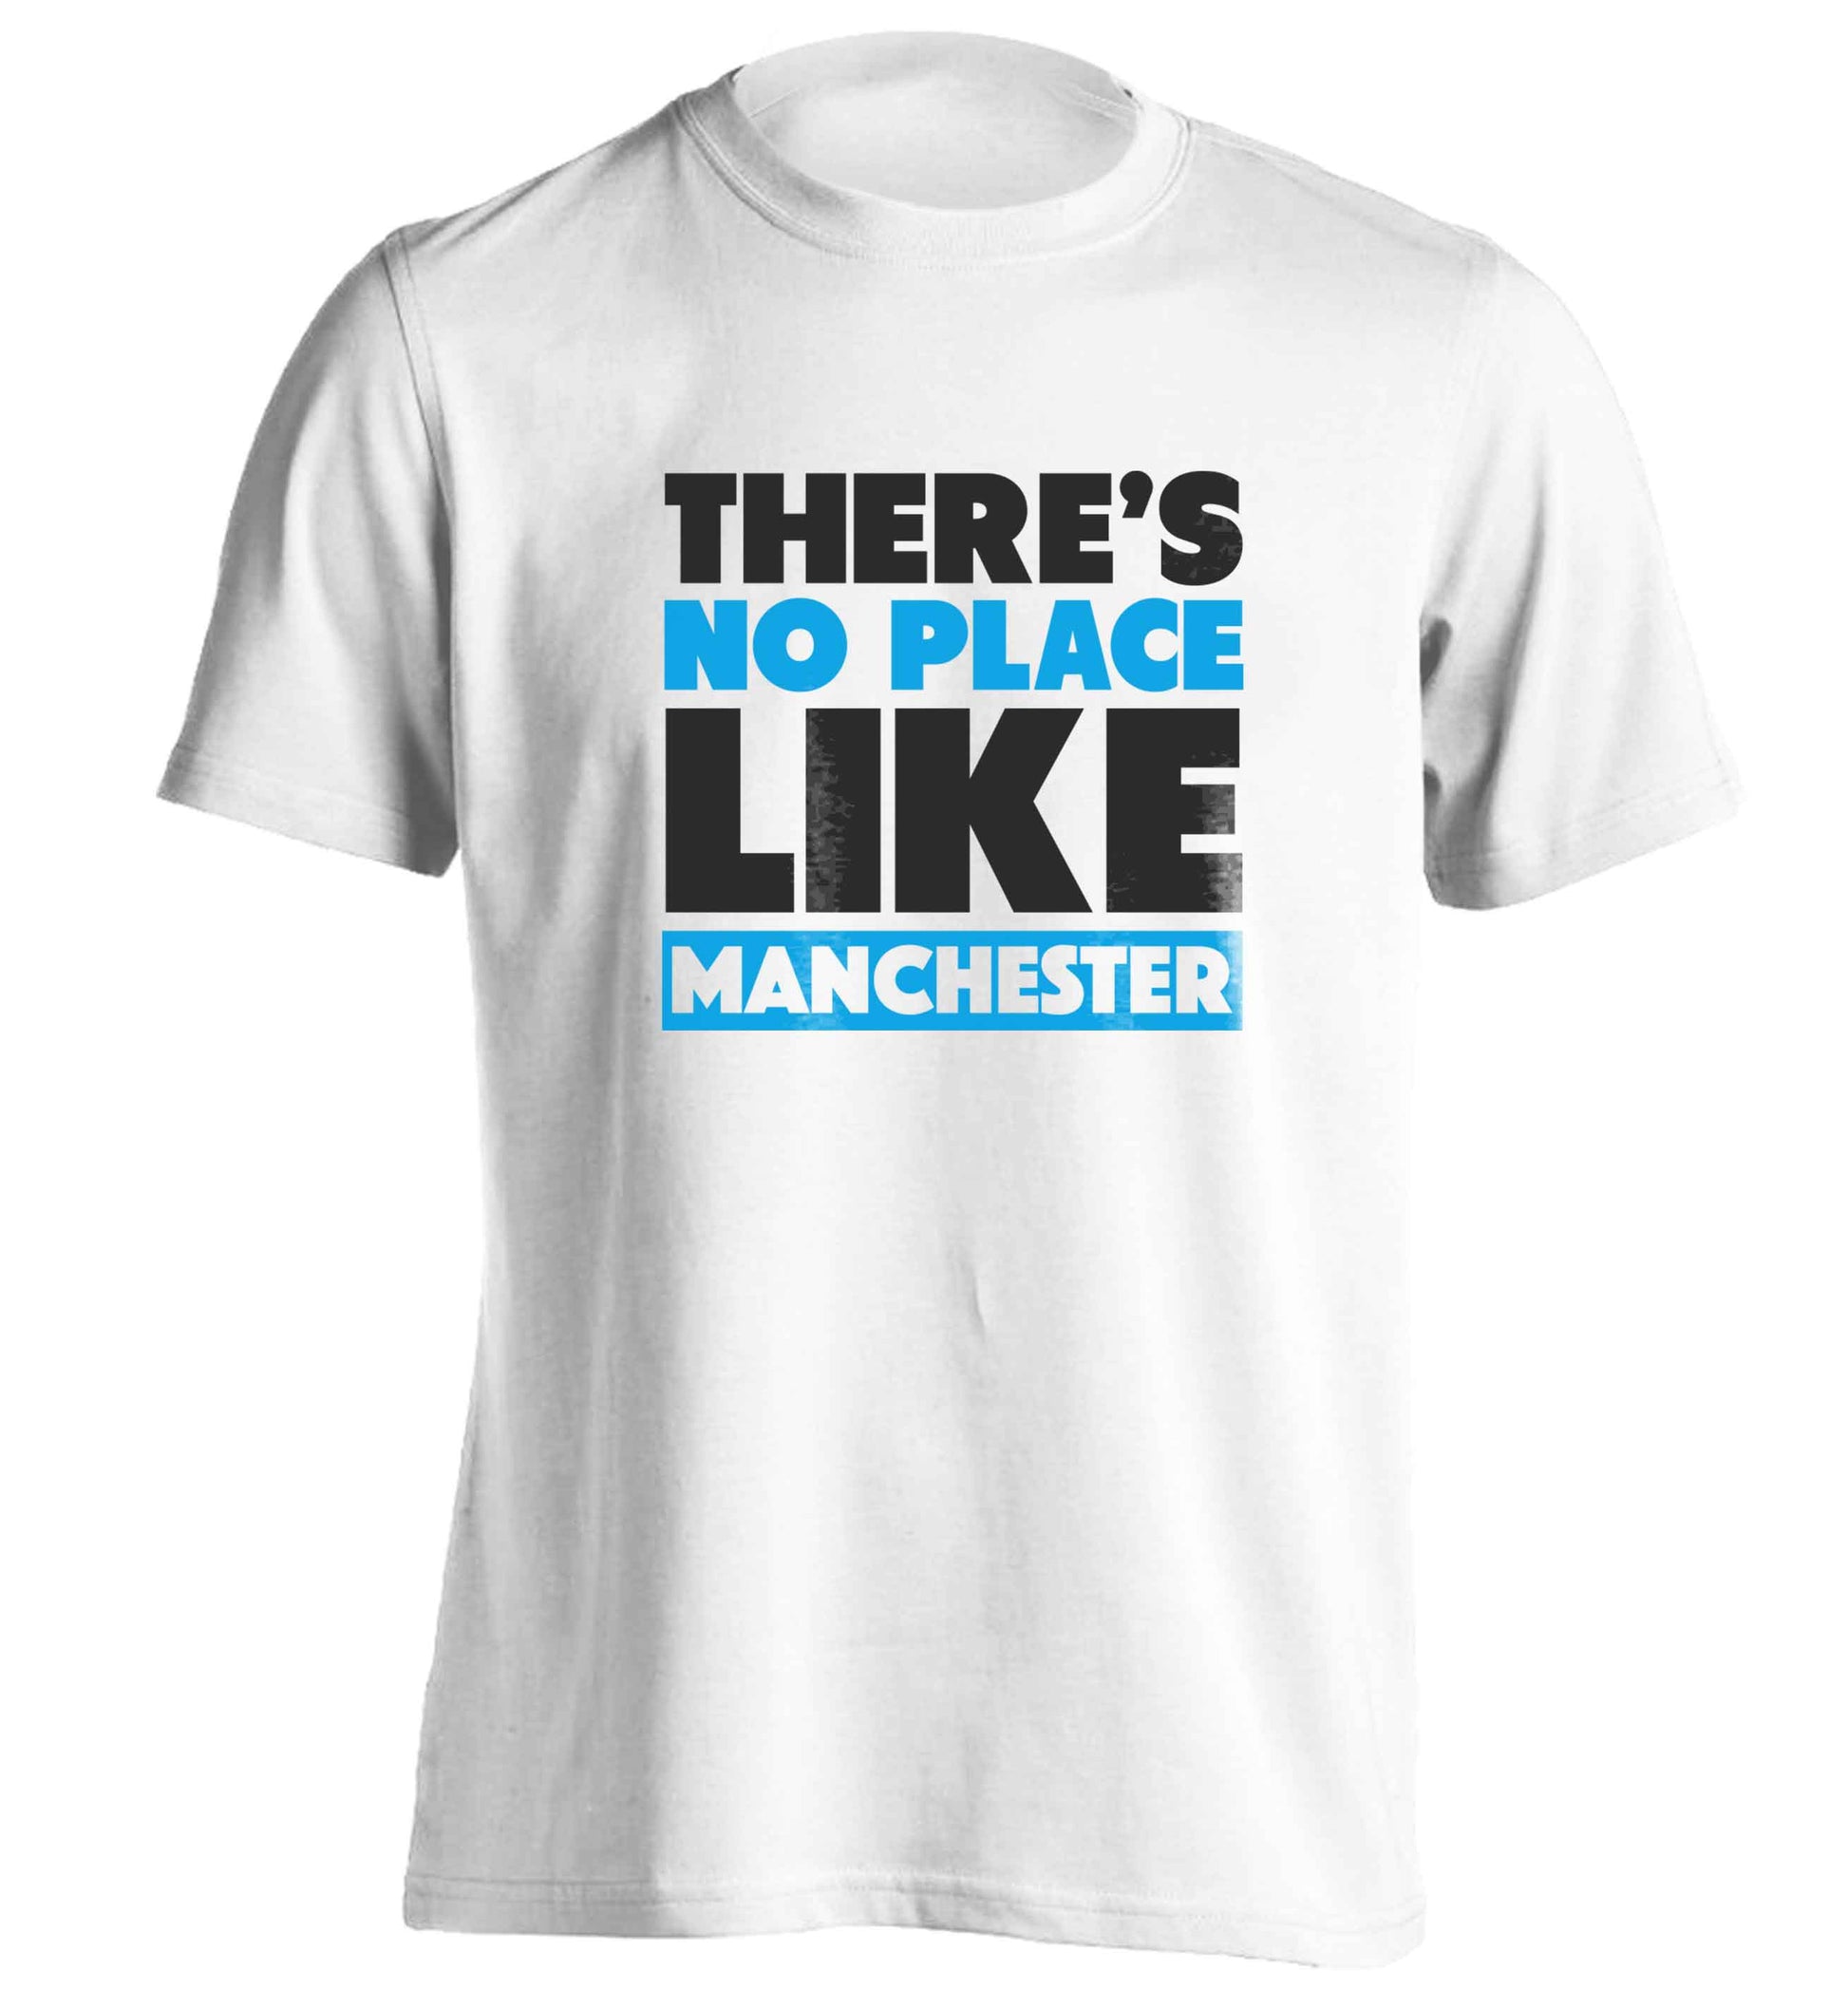 There's no place like Manchester adults unisex white Tshirt 2XL